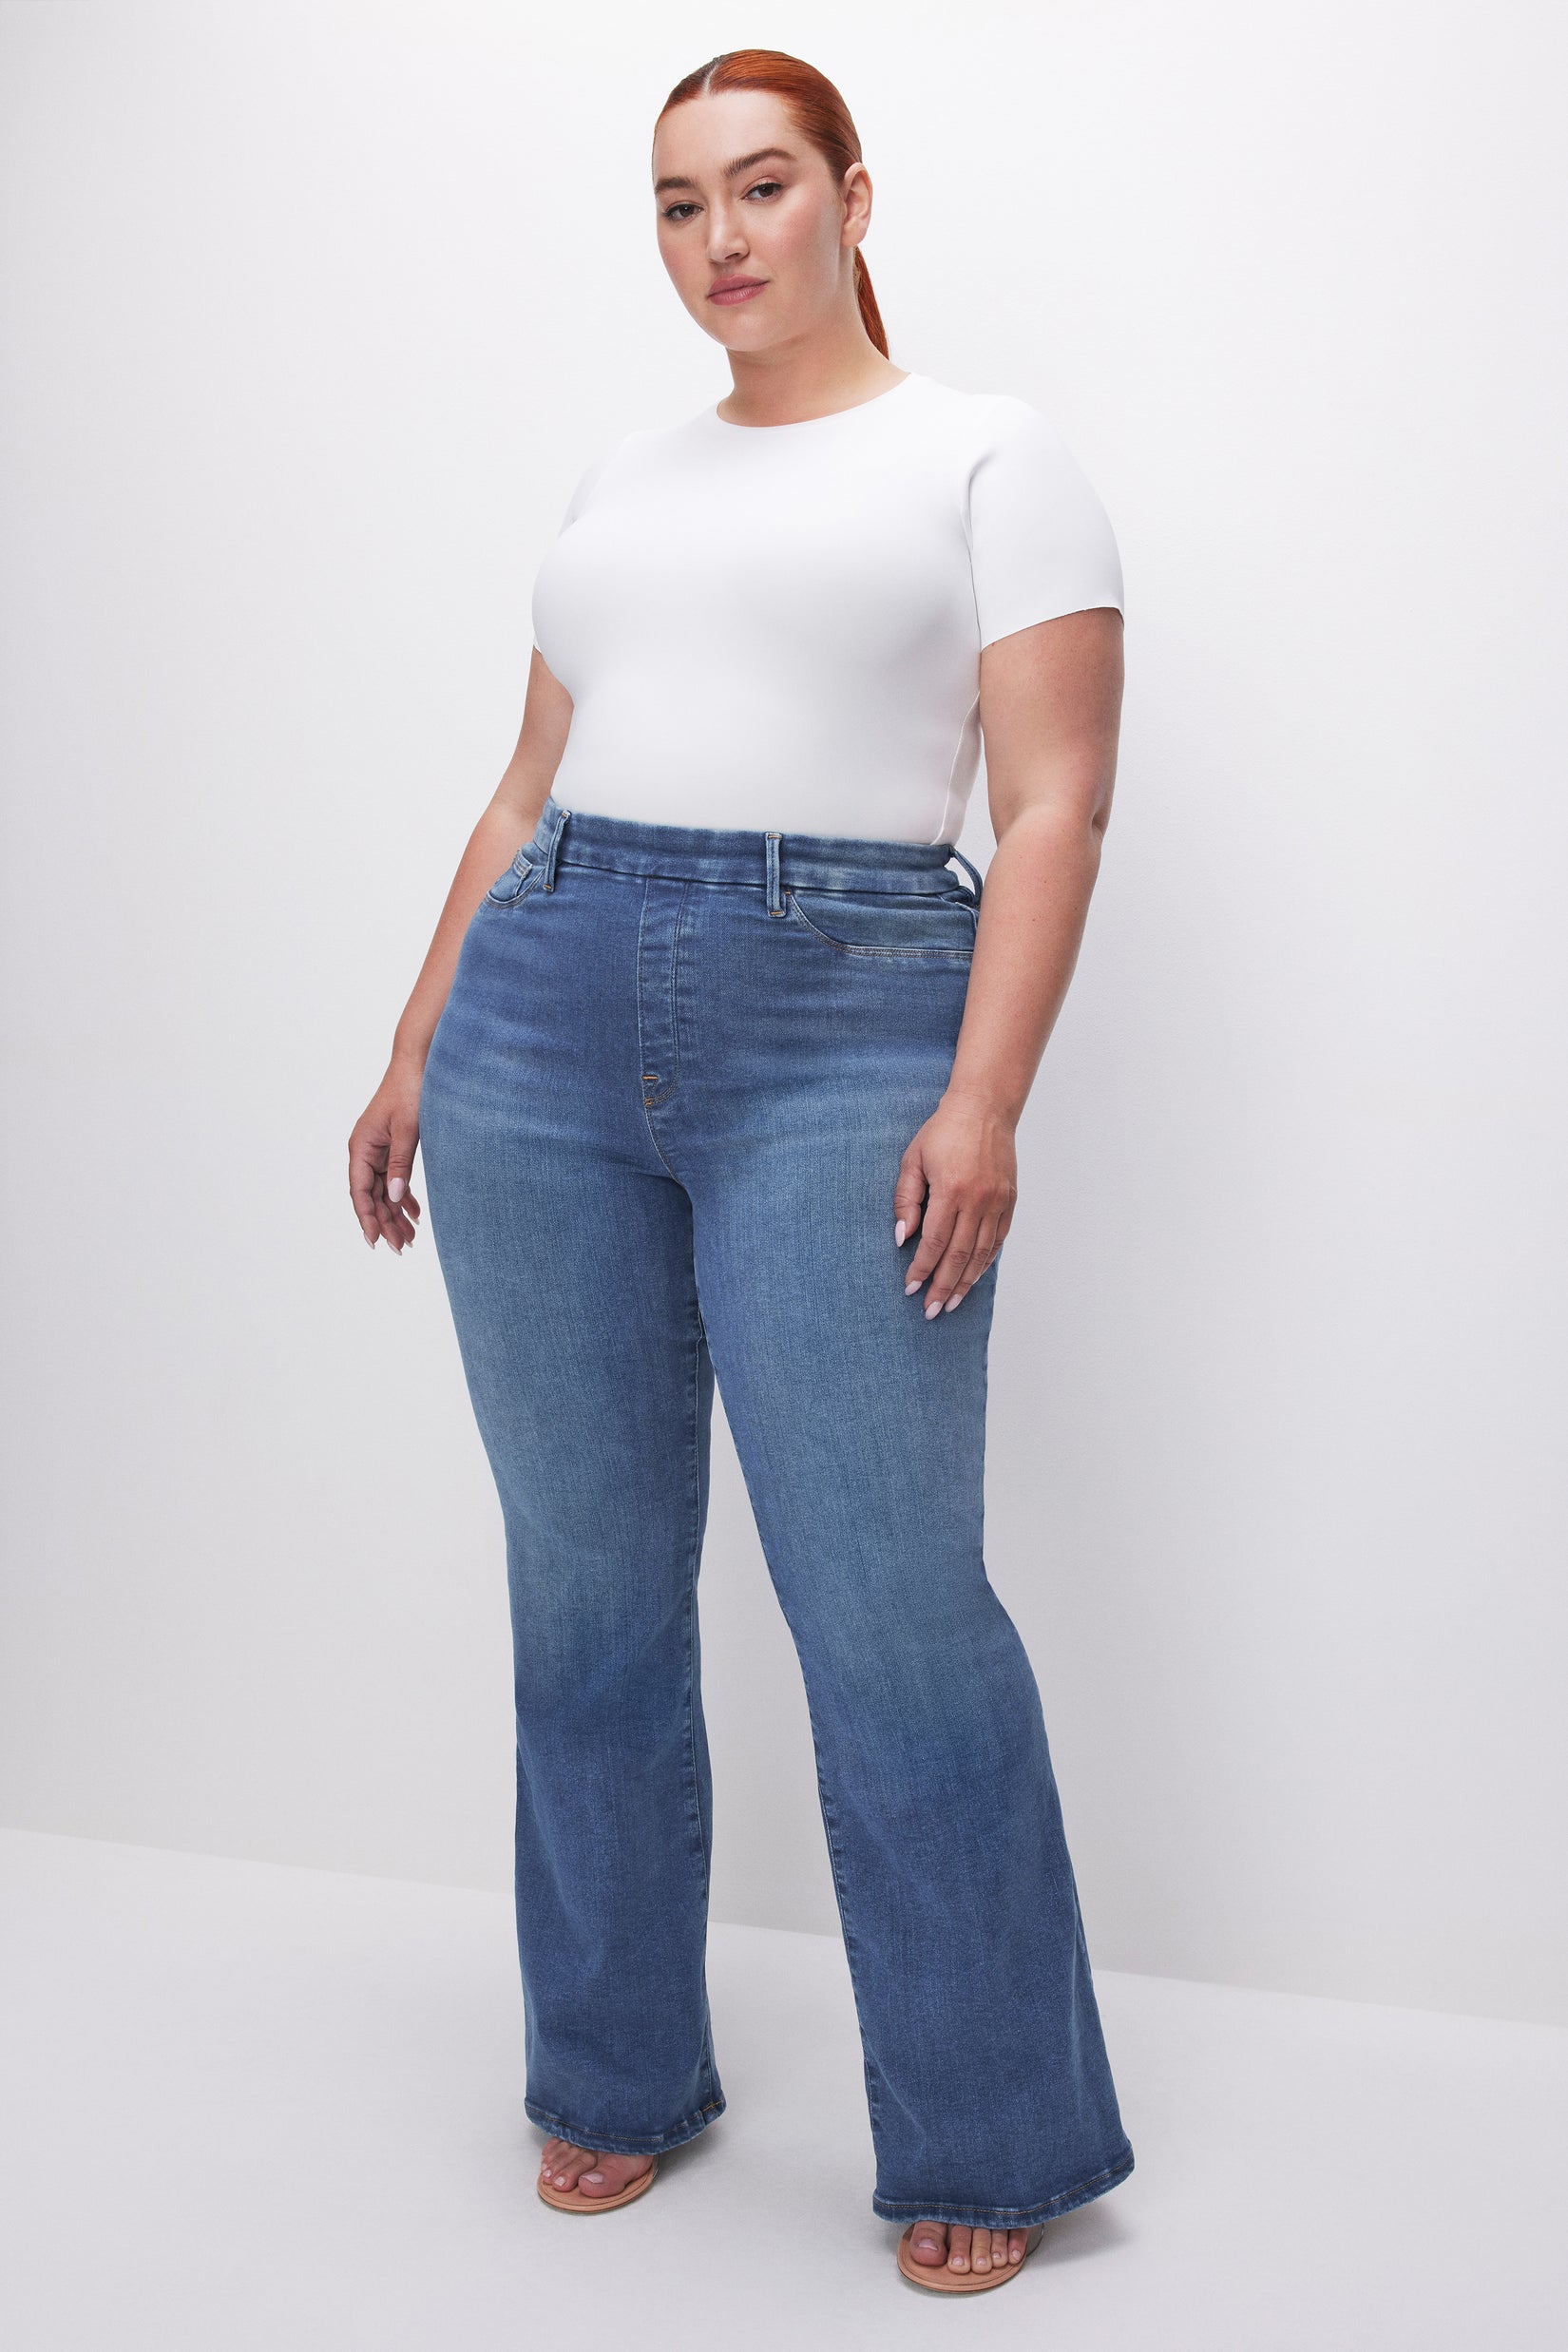 POWER STRETCH PULL-ON FLARE JEANS | INDIGO490 - GOOD AMERICAN